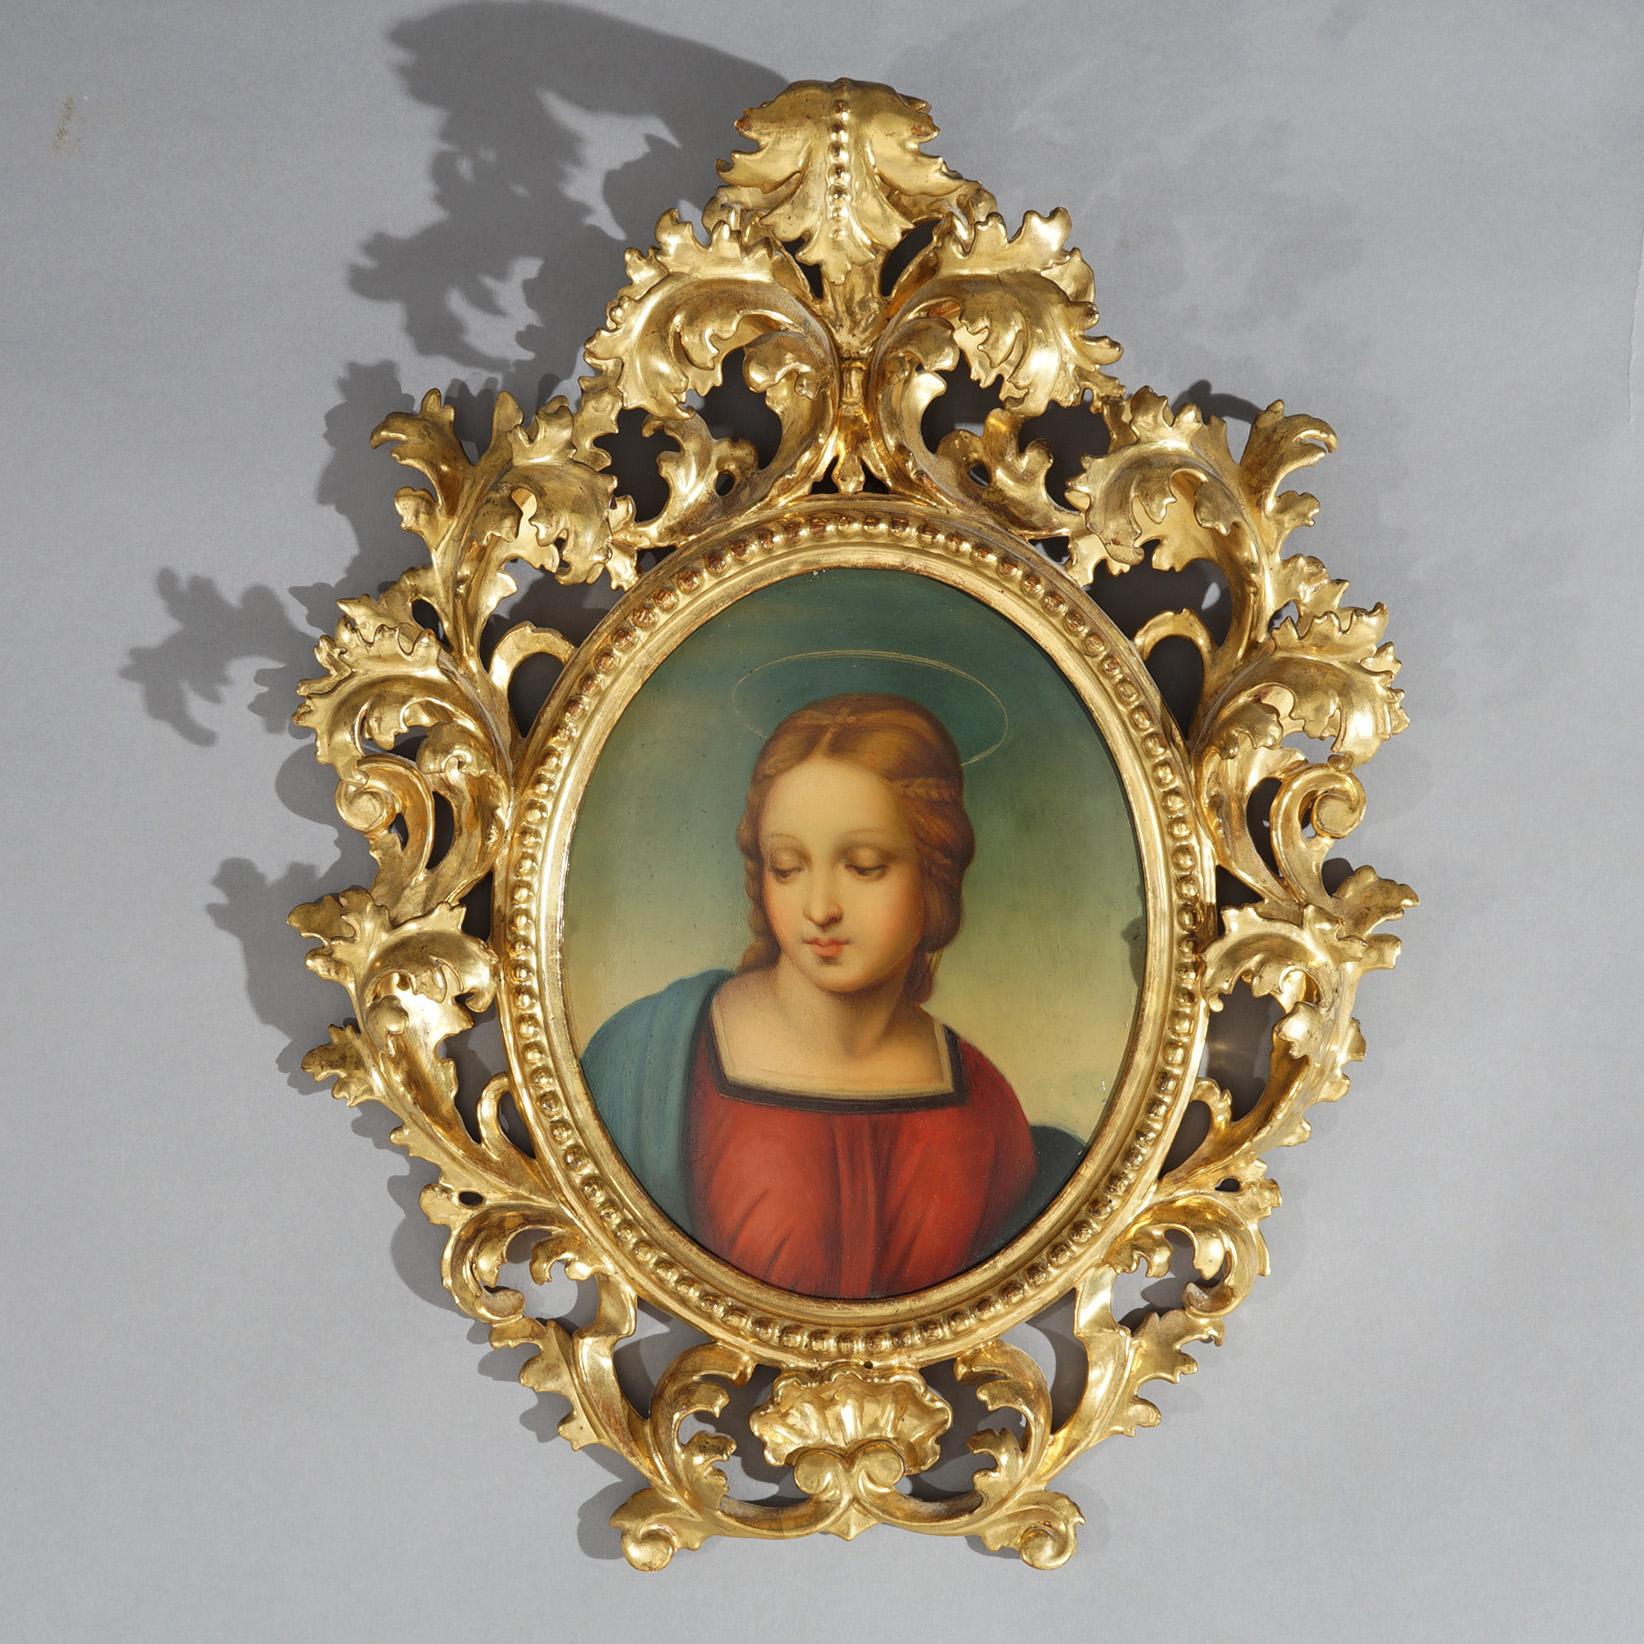 Hand-Painted Antique KPM Painting on Porcelain after Madonna Of The Goldfinch, Raphael, 19thC